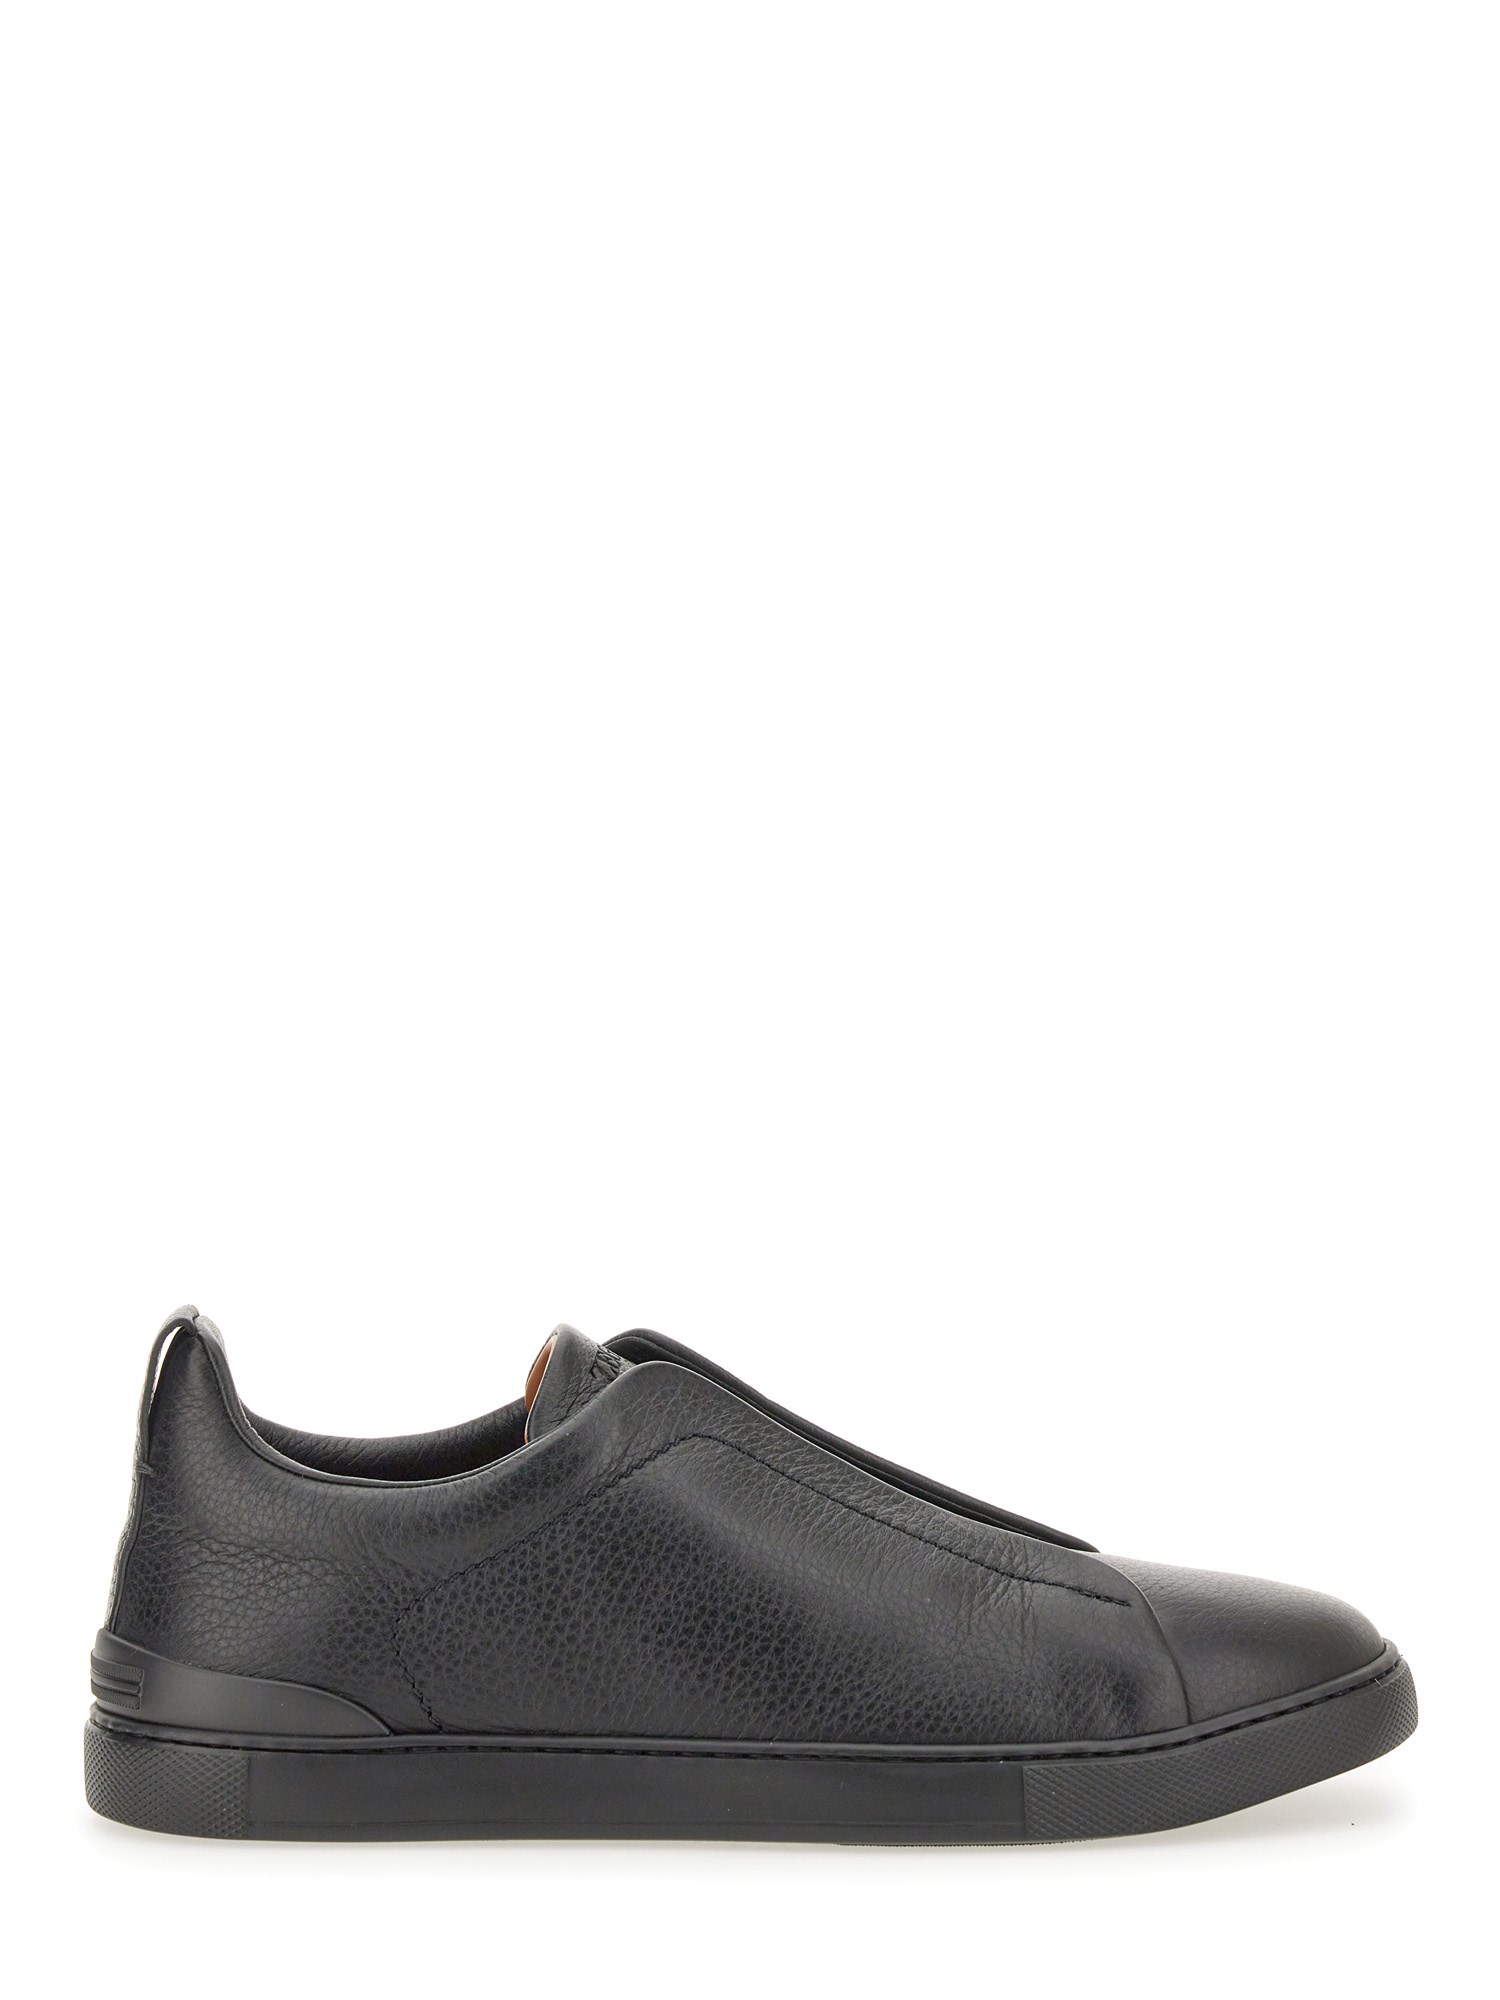 zegna low top sneaker with triple stitch